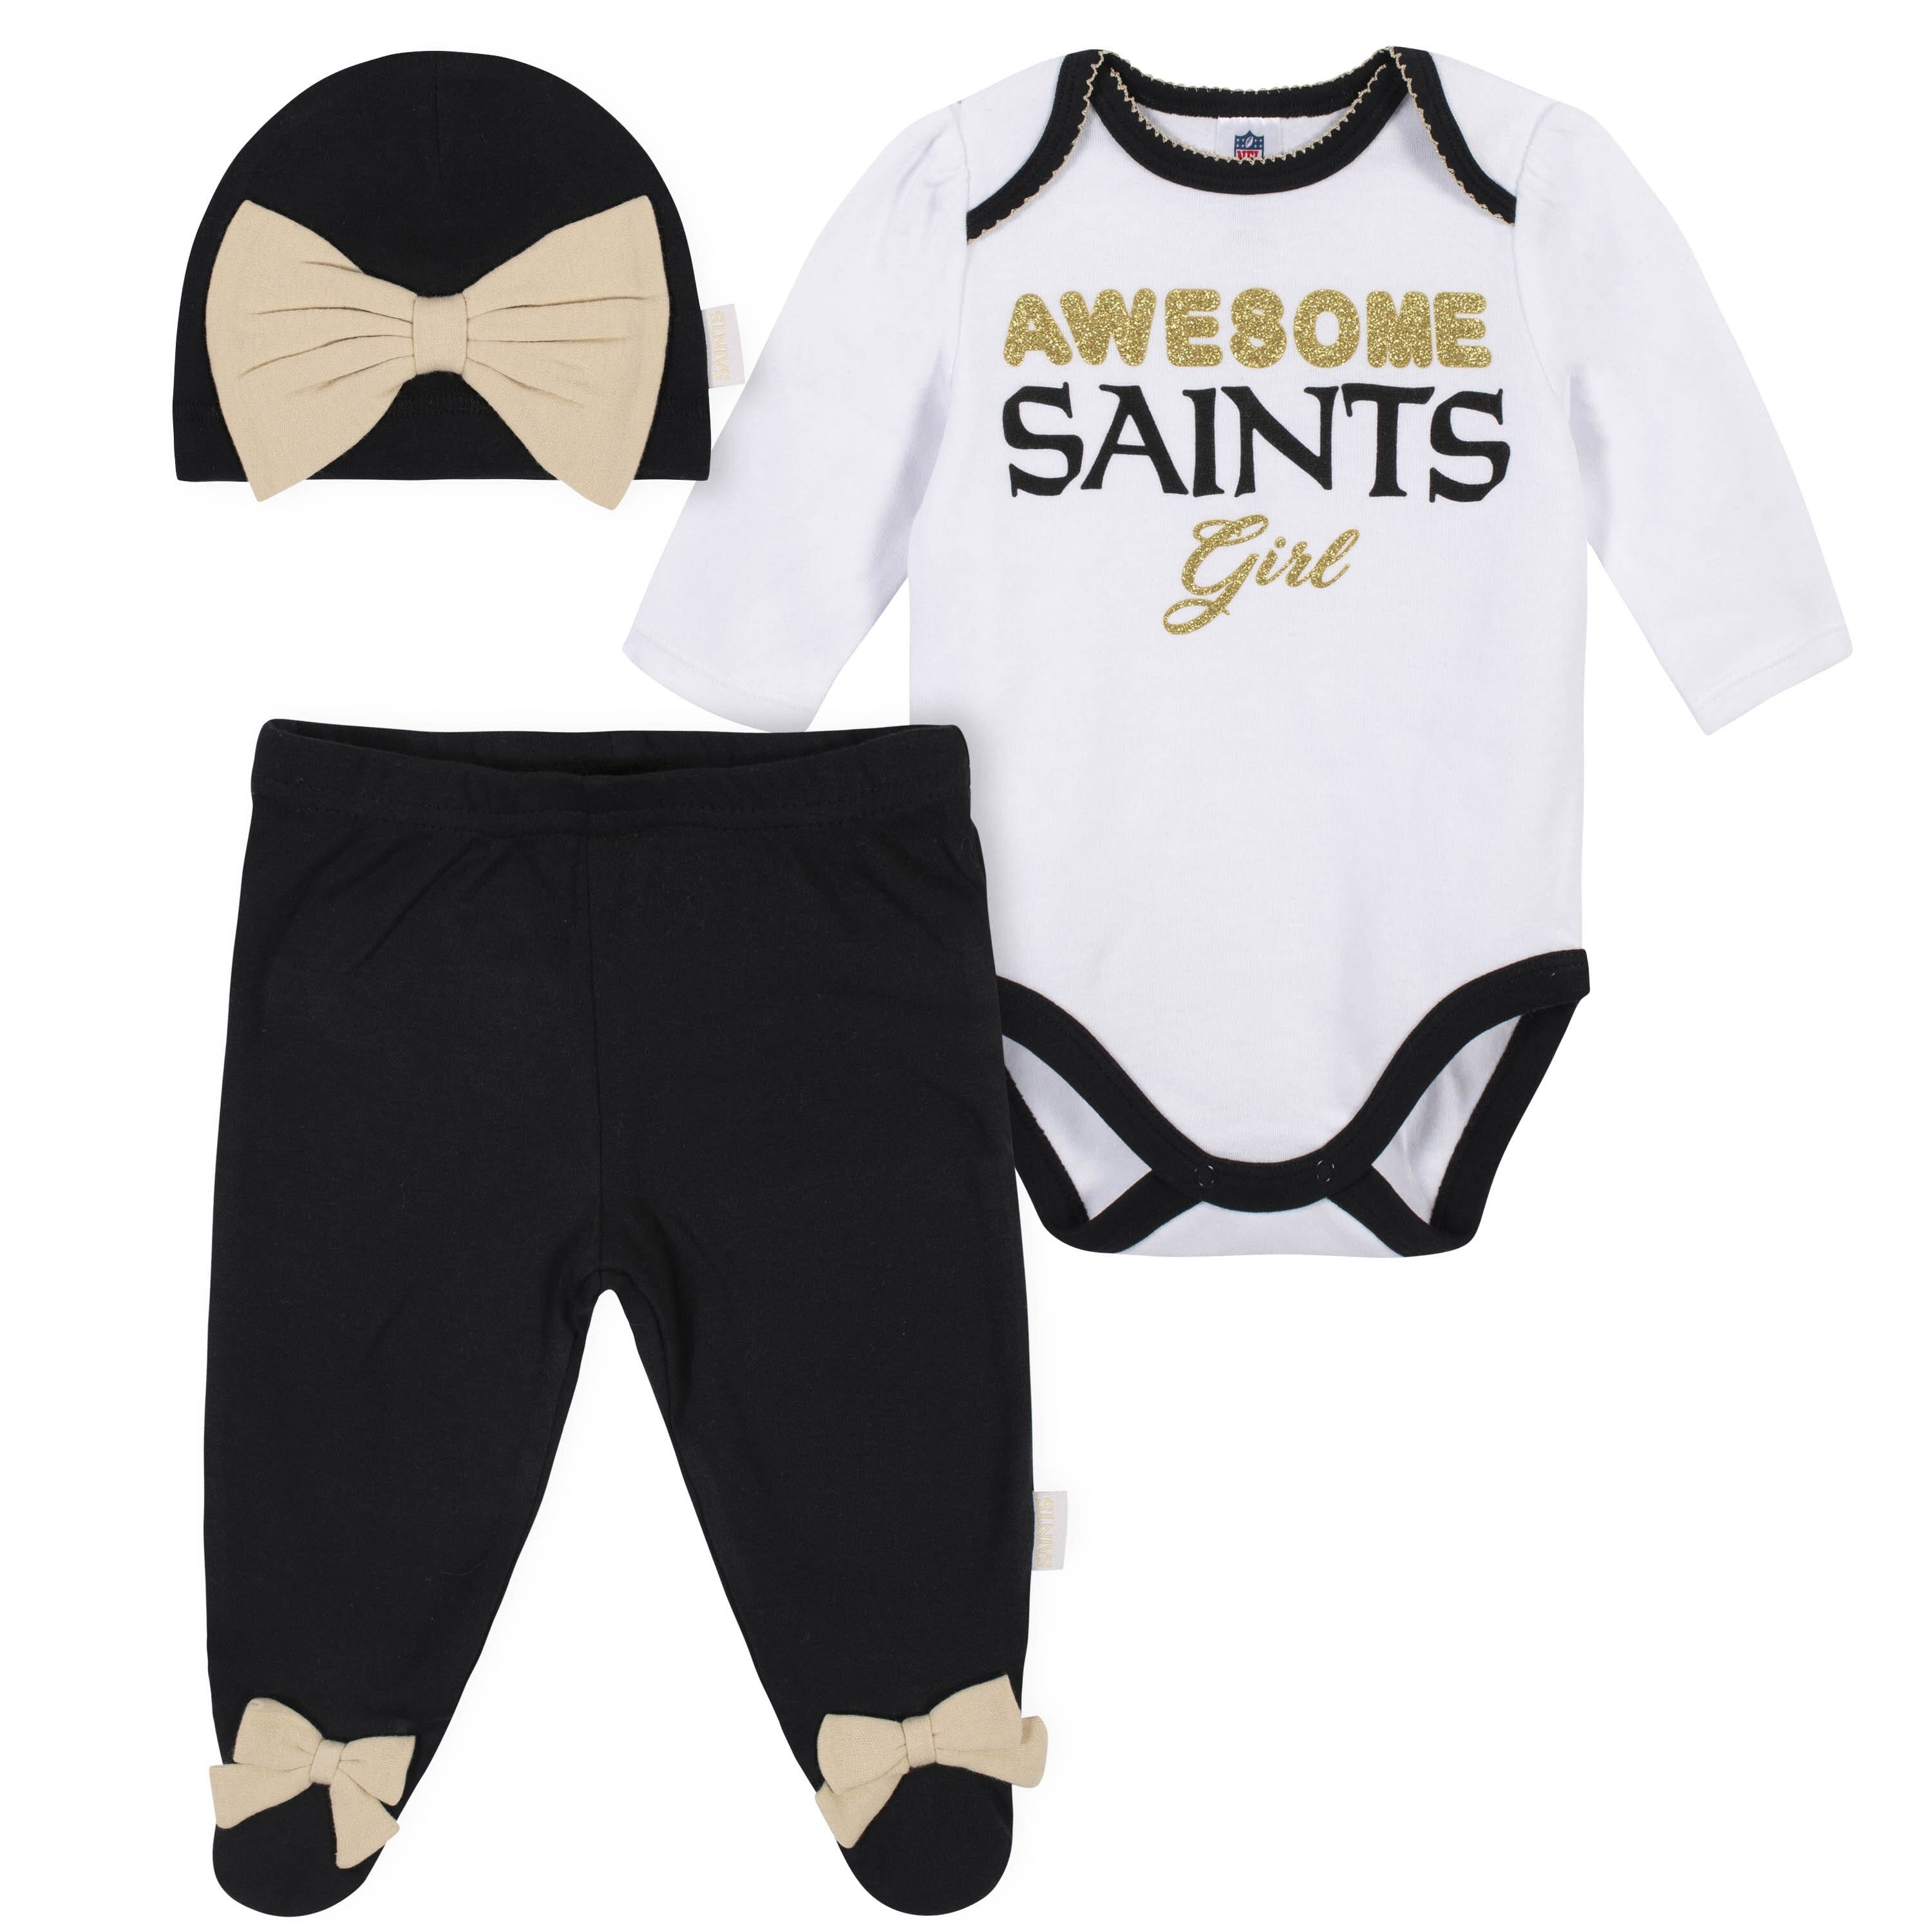 Gerber Awesome Saints Baby Girl Bodysuit, Footed Pant & Cap Set